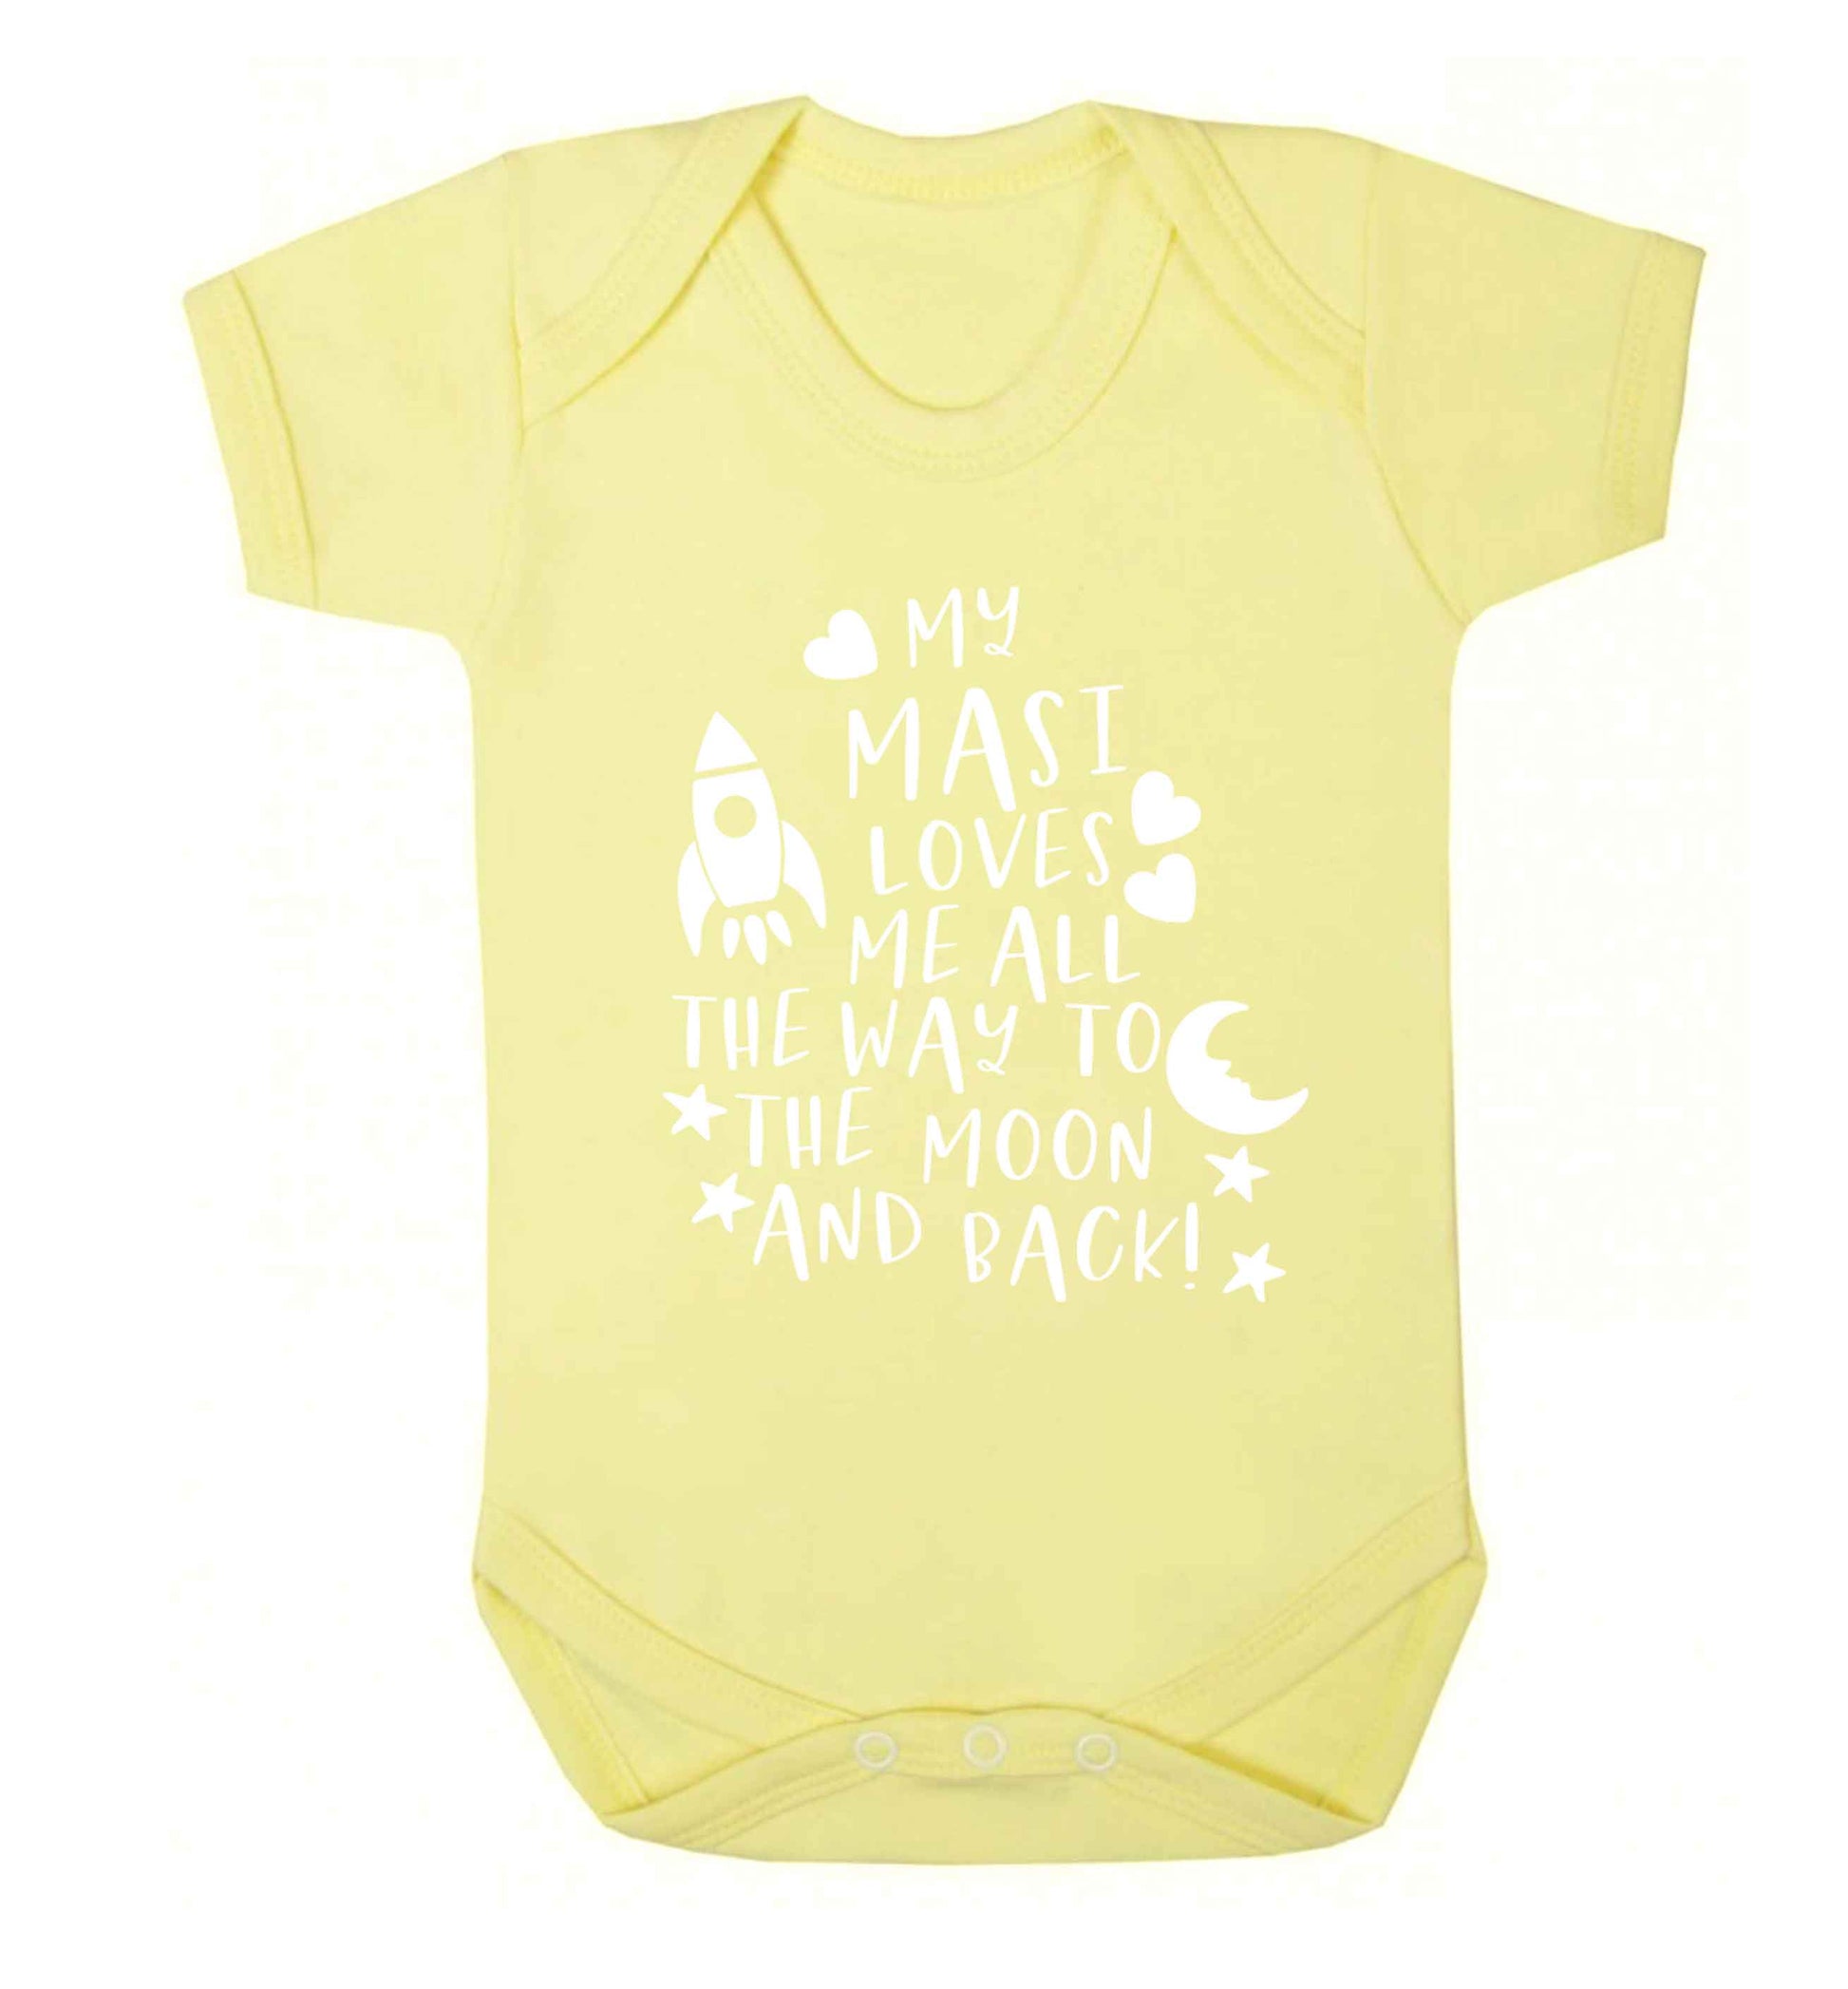 My masi loves me all the way to the moon and back Baby Vest pale yellow 18-24 months